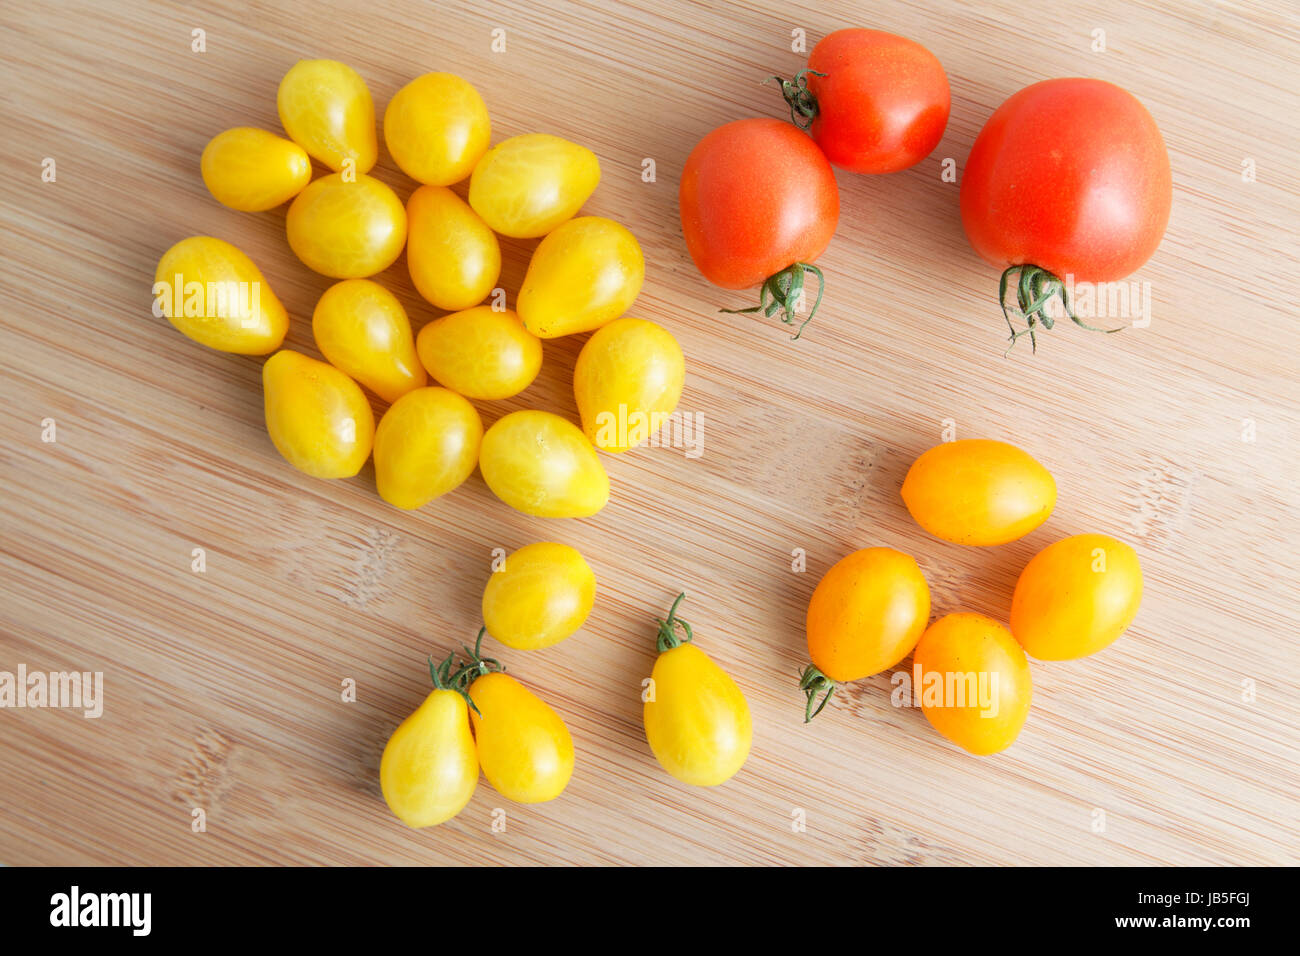 tomatoes on the cutting board Stock Photo